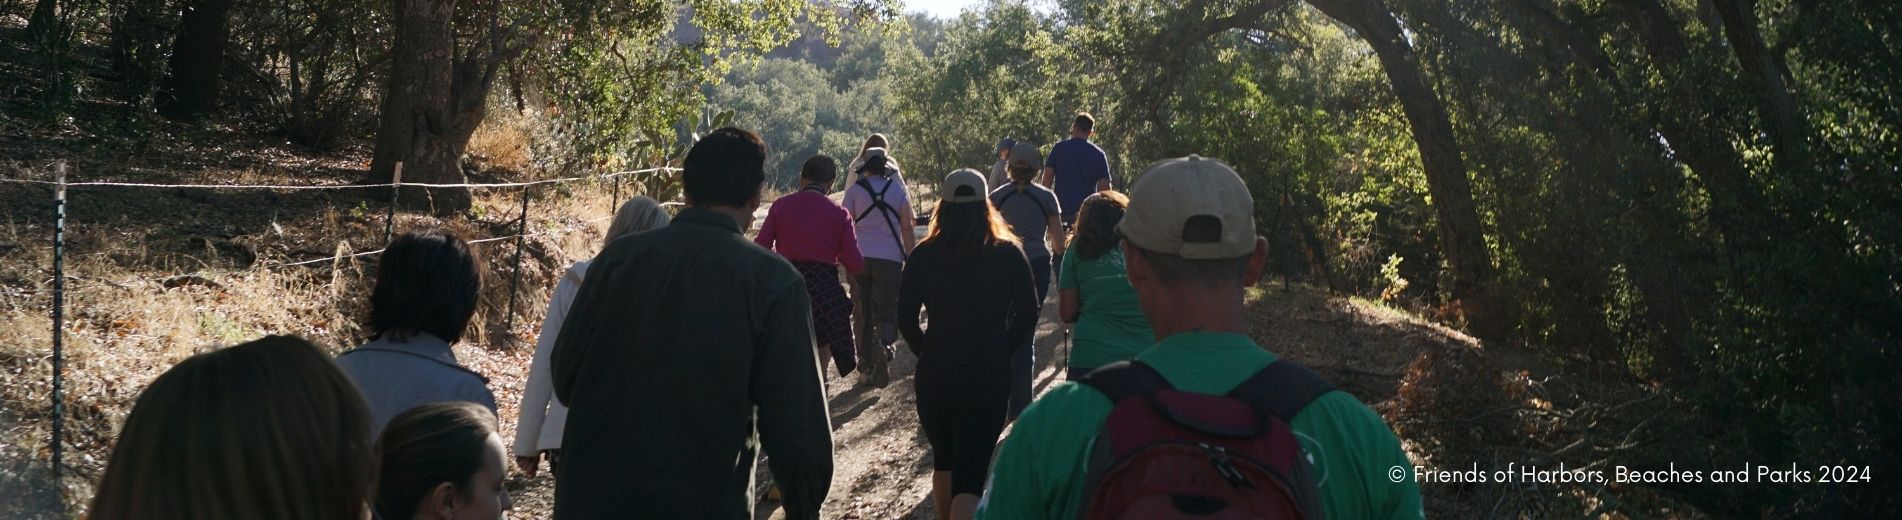 Hike group in Trabuco Rose Park in the shade. Riparian habitat with shady spots and sun flowing throughout